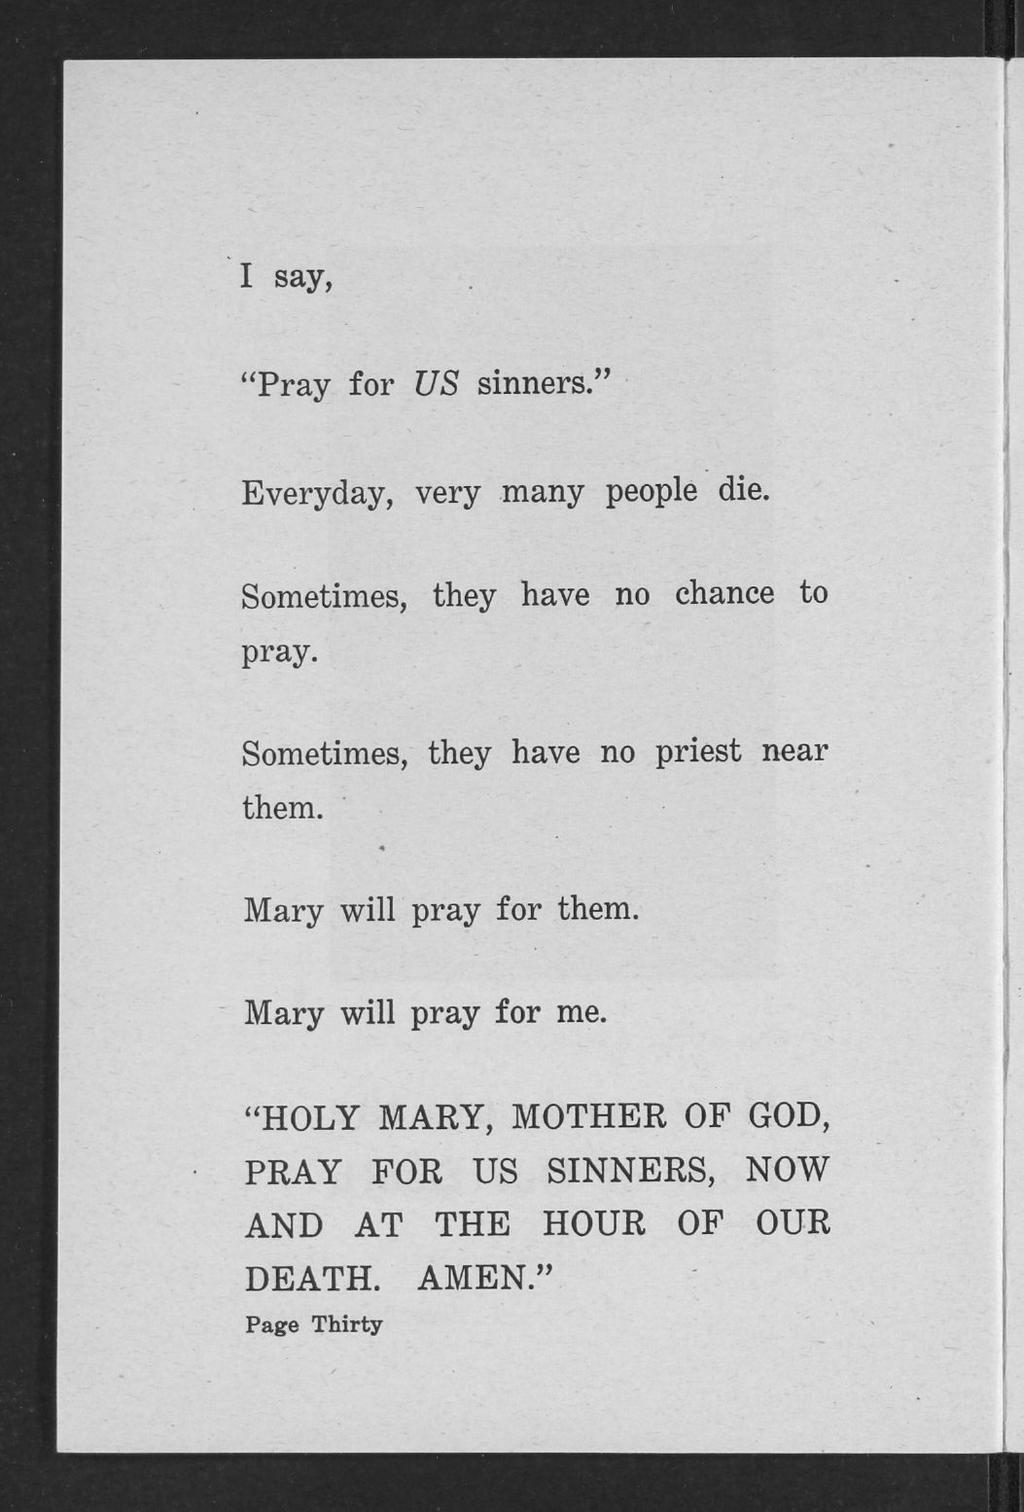 I say, "Pray for US sinners." Everyday, very many people die. Sometimes, they have no chance to pray. Sometimes, they have no priest near them.